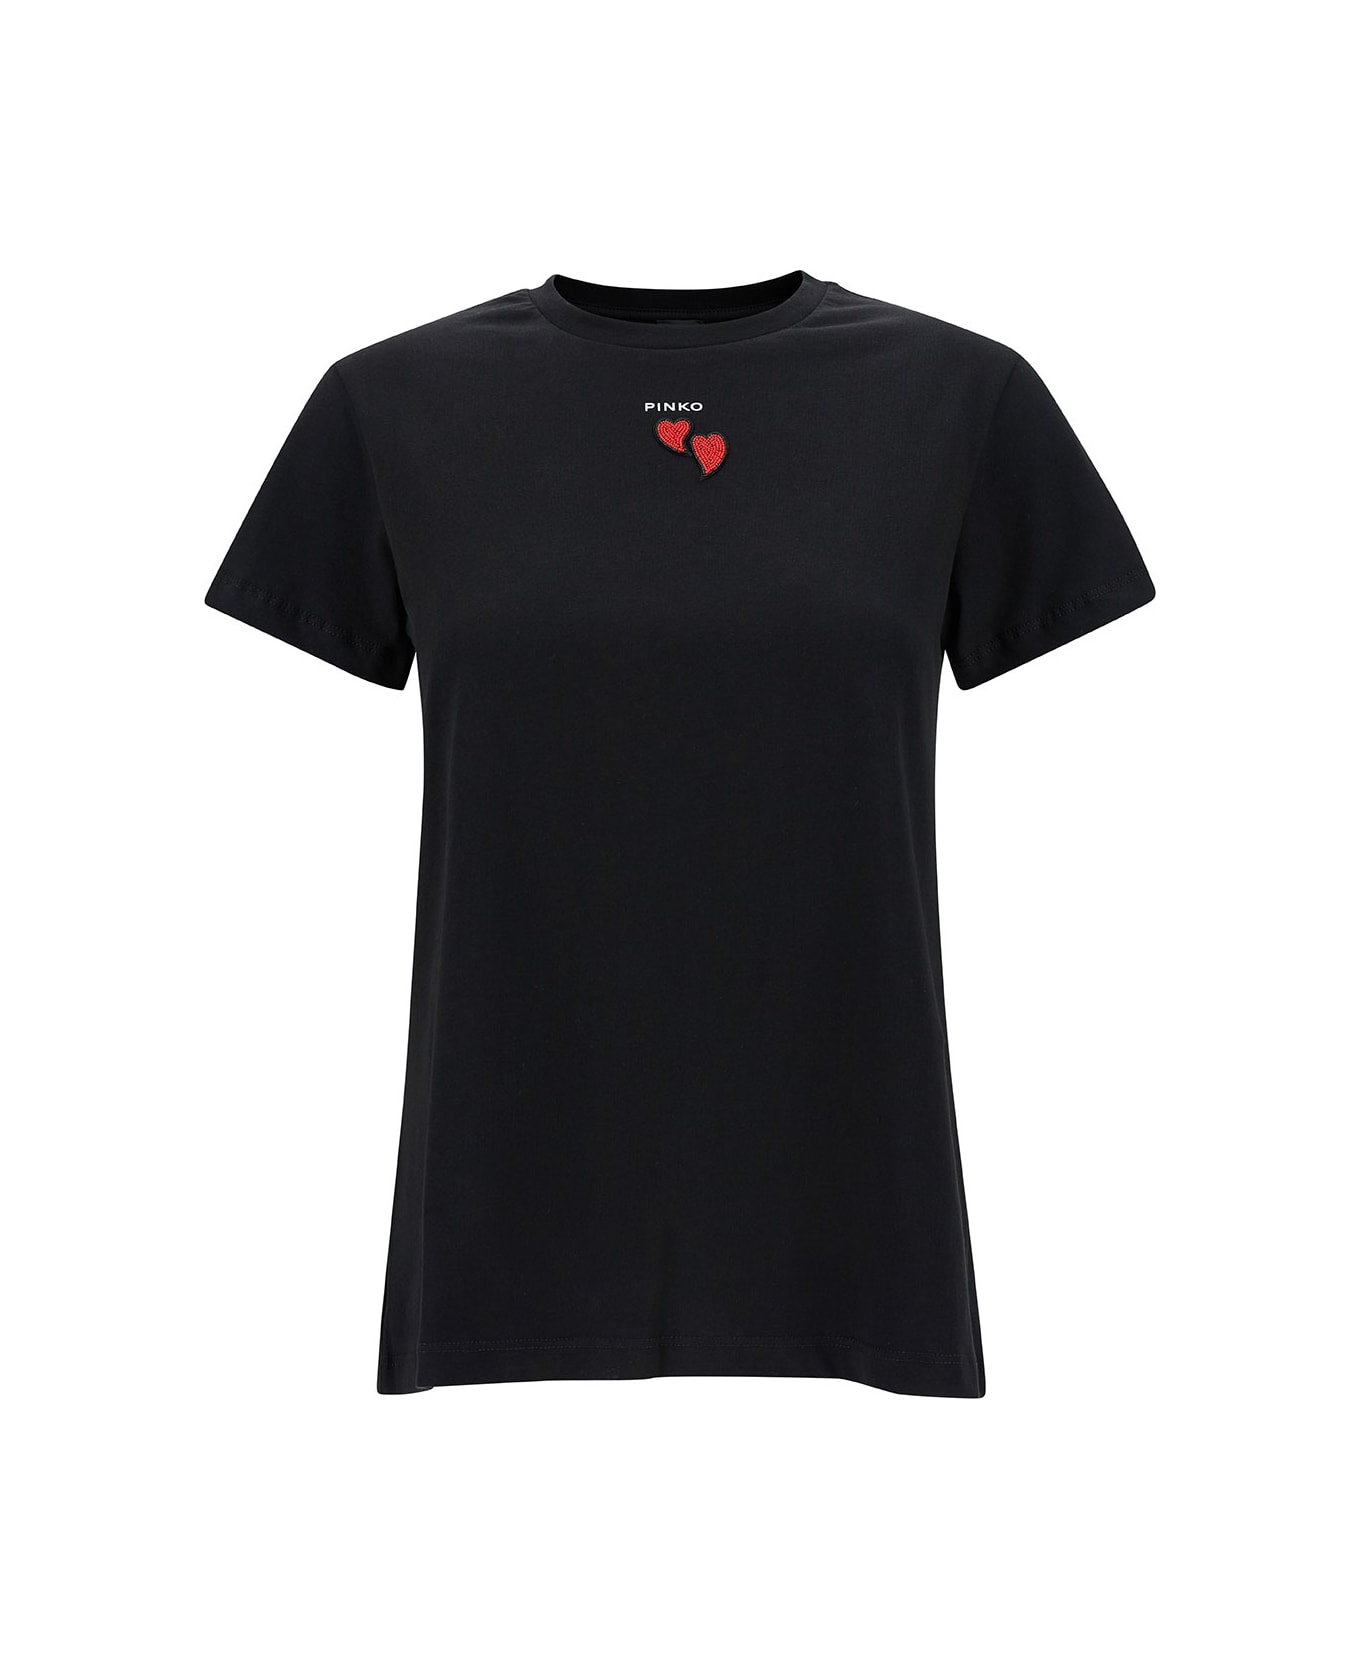 Pinko T-shirt Embroidery Hearts - Black Tシャツ